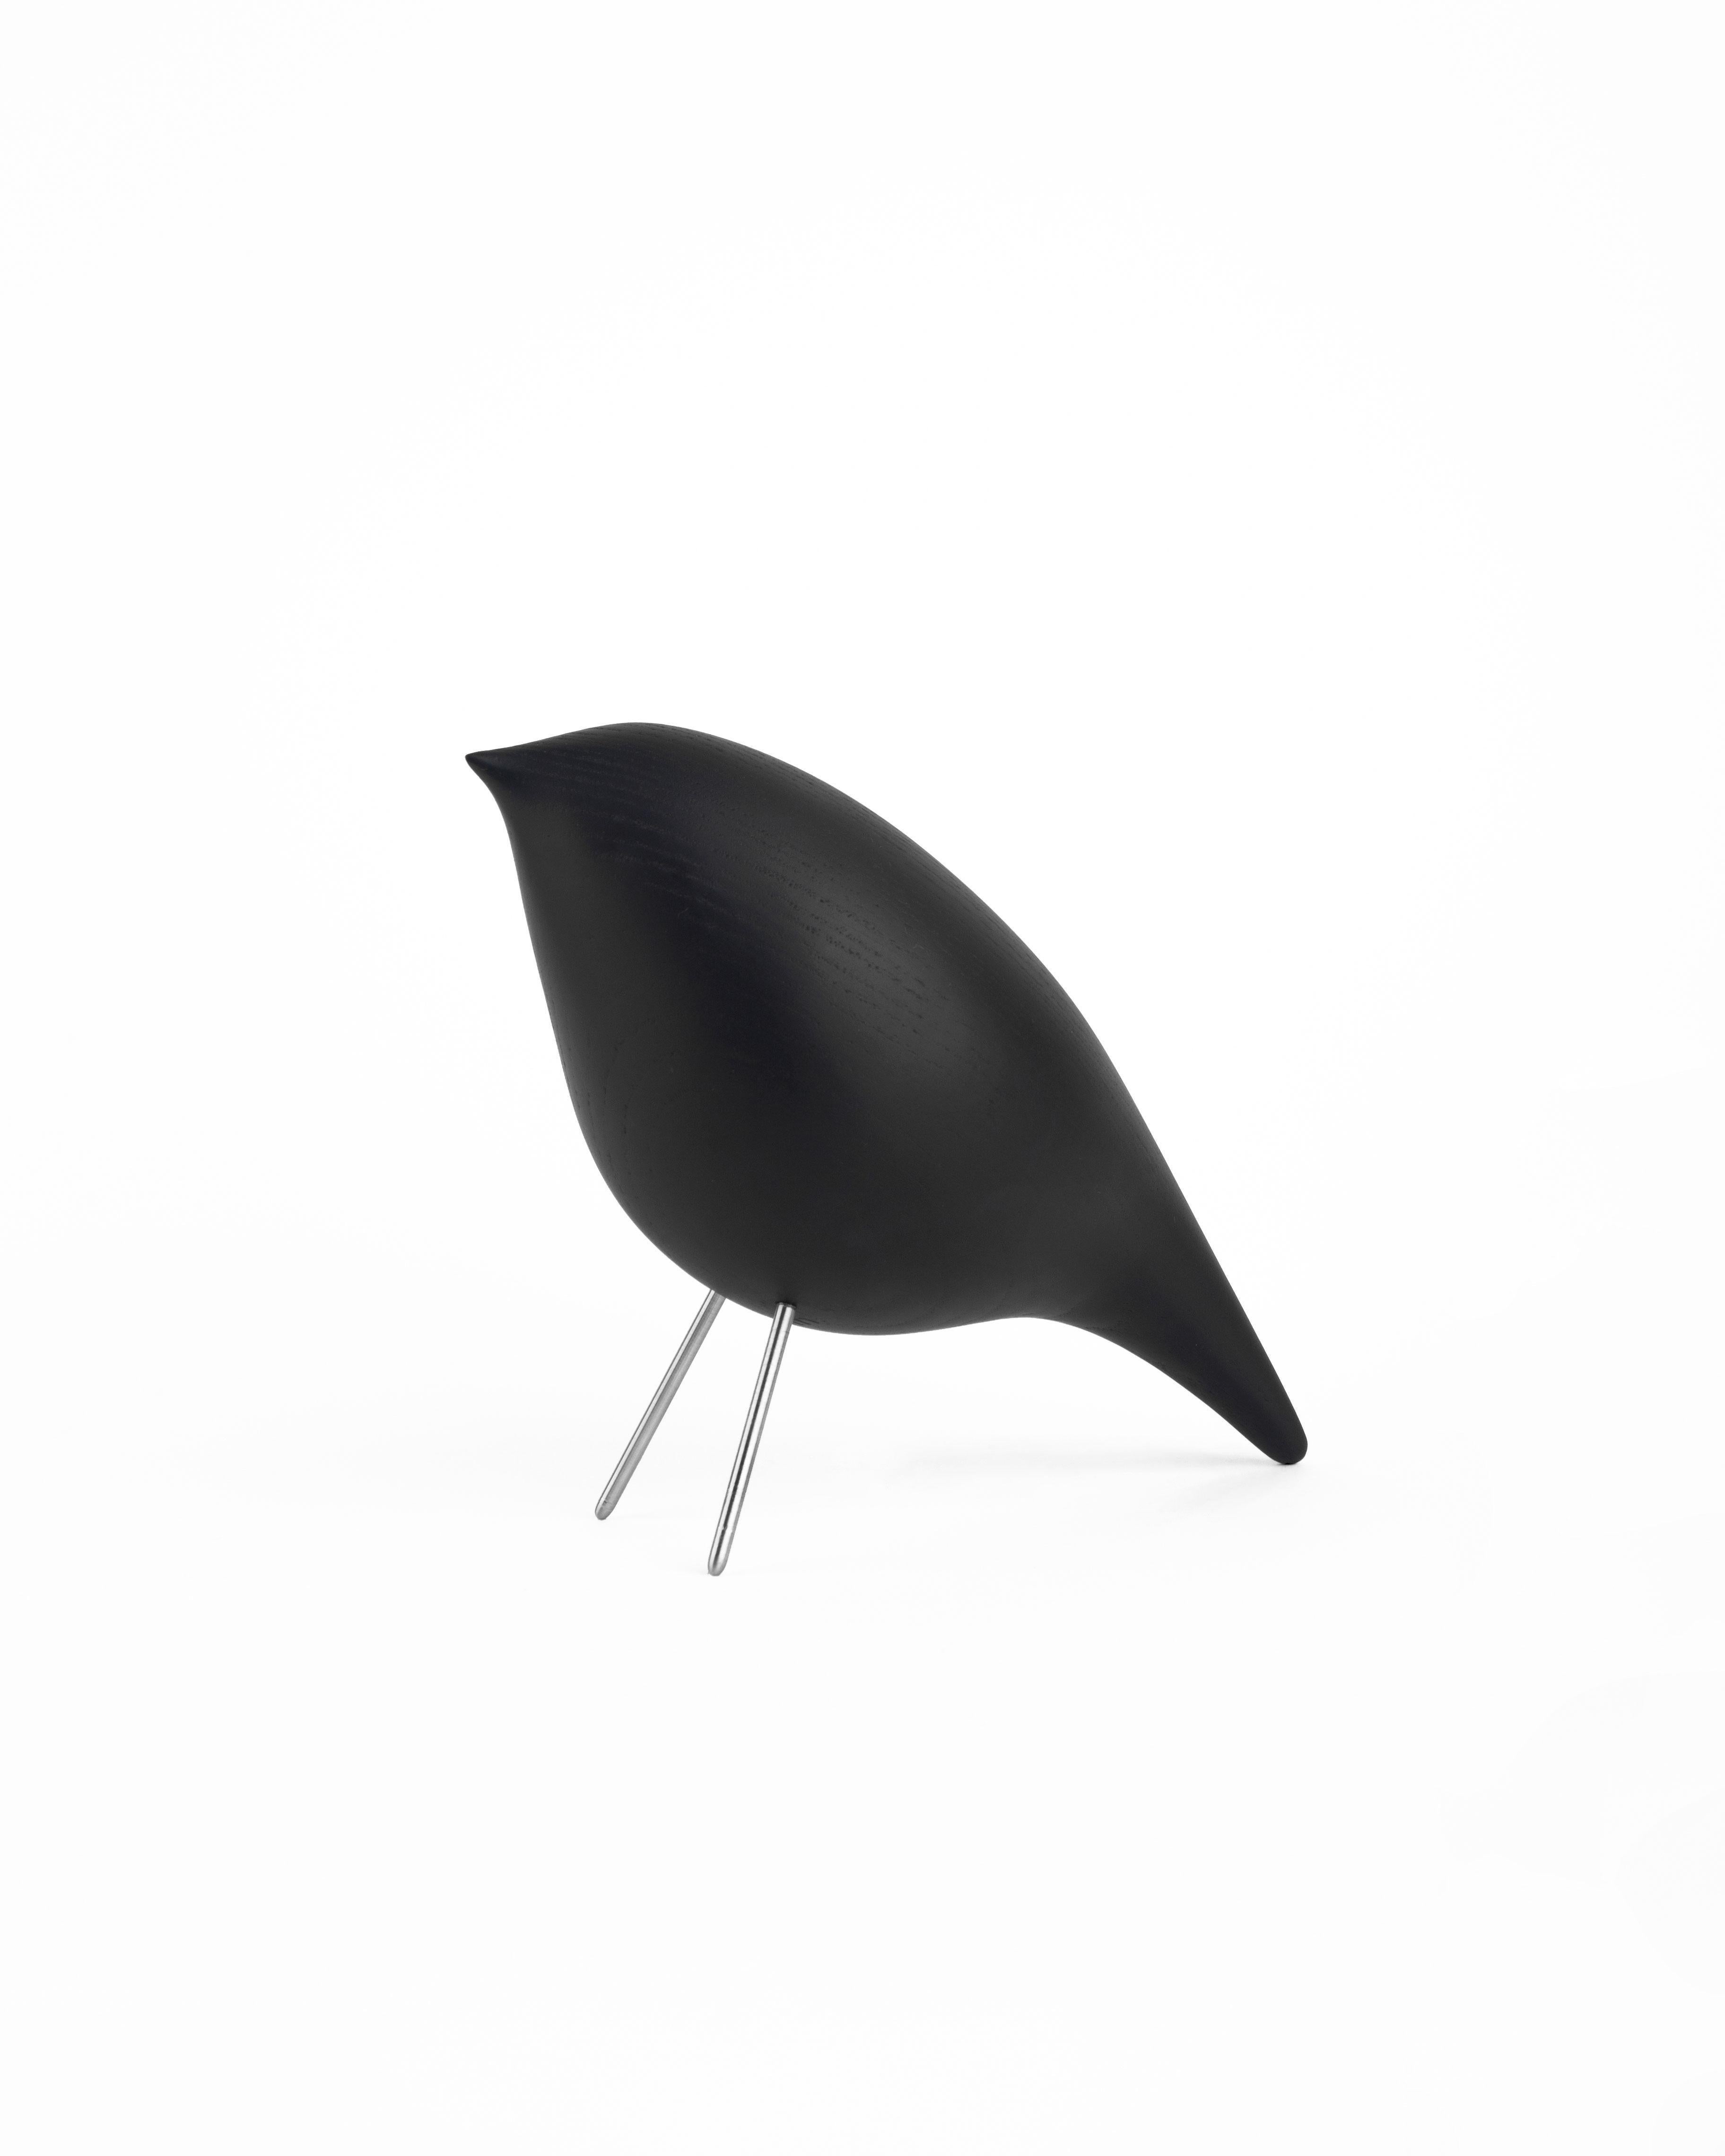 Contemporary 'Tweety Decorative Bird CS3' by Noom, Black Ashwood, In stock For Sale 3